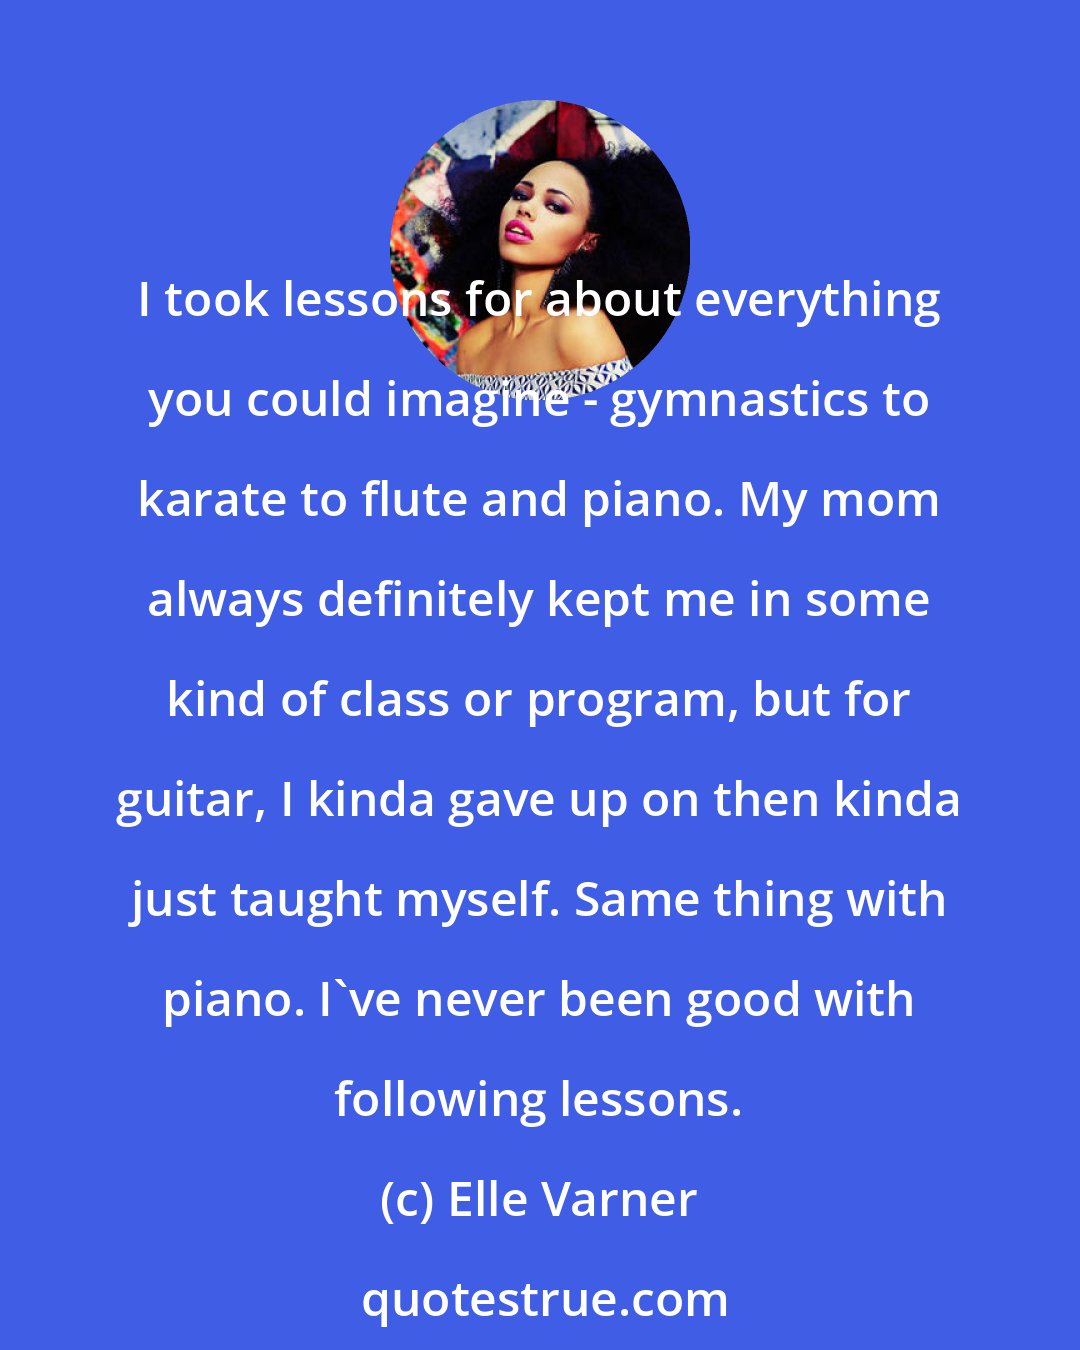 Elle Varner: I took lessons for about everything you could imagine - gymnastics to karate to flute and piano. My mom always definitely kept me in some kind of class or program, but for guitar, I kinda gave up on then kinda just taught myself. Same thing with piano. I've never been good with following lessons.